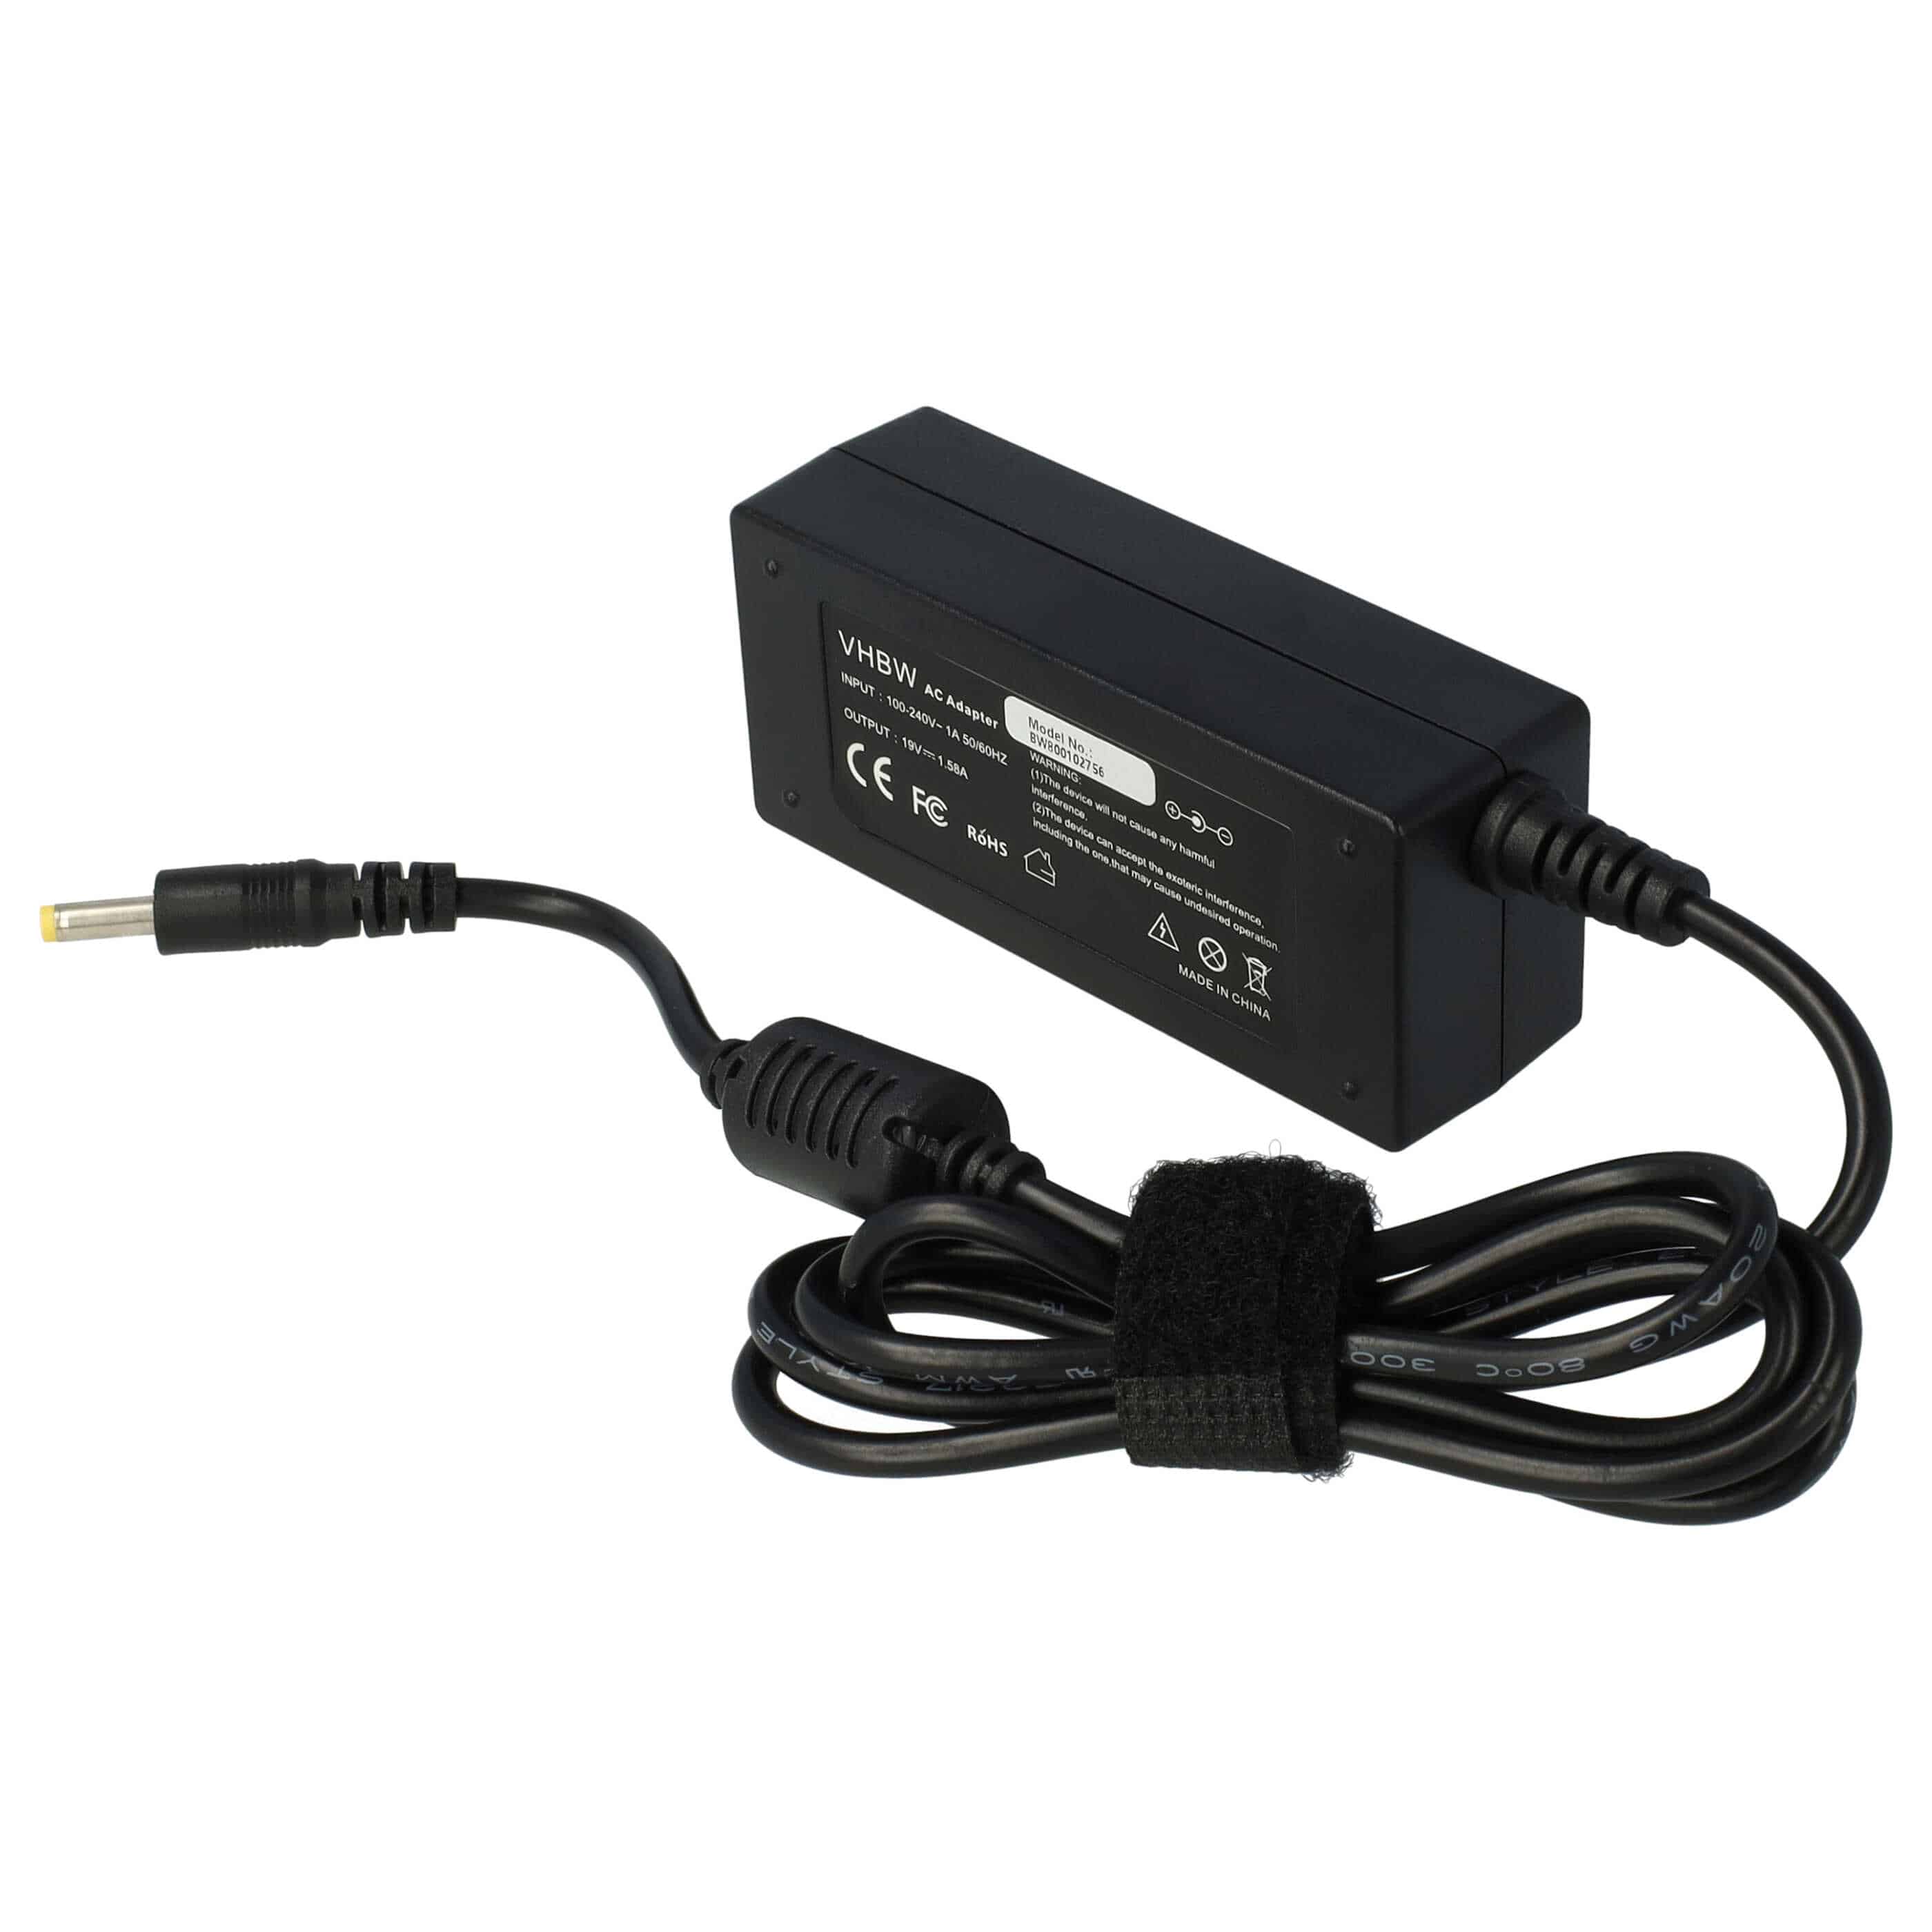 Mains Power Adapter replaces HP A0301R3, 496813-001, 493092-002, NA374AA#ABA for HPNotebook etc., 30 W